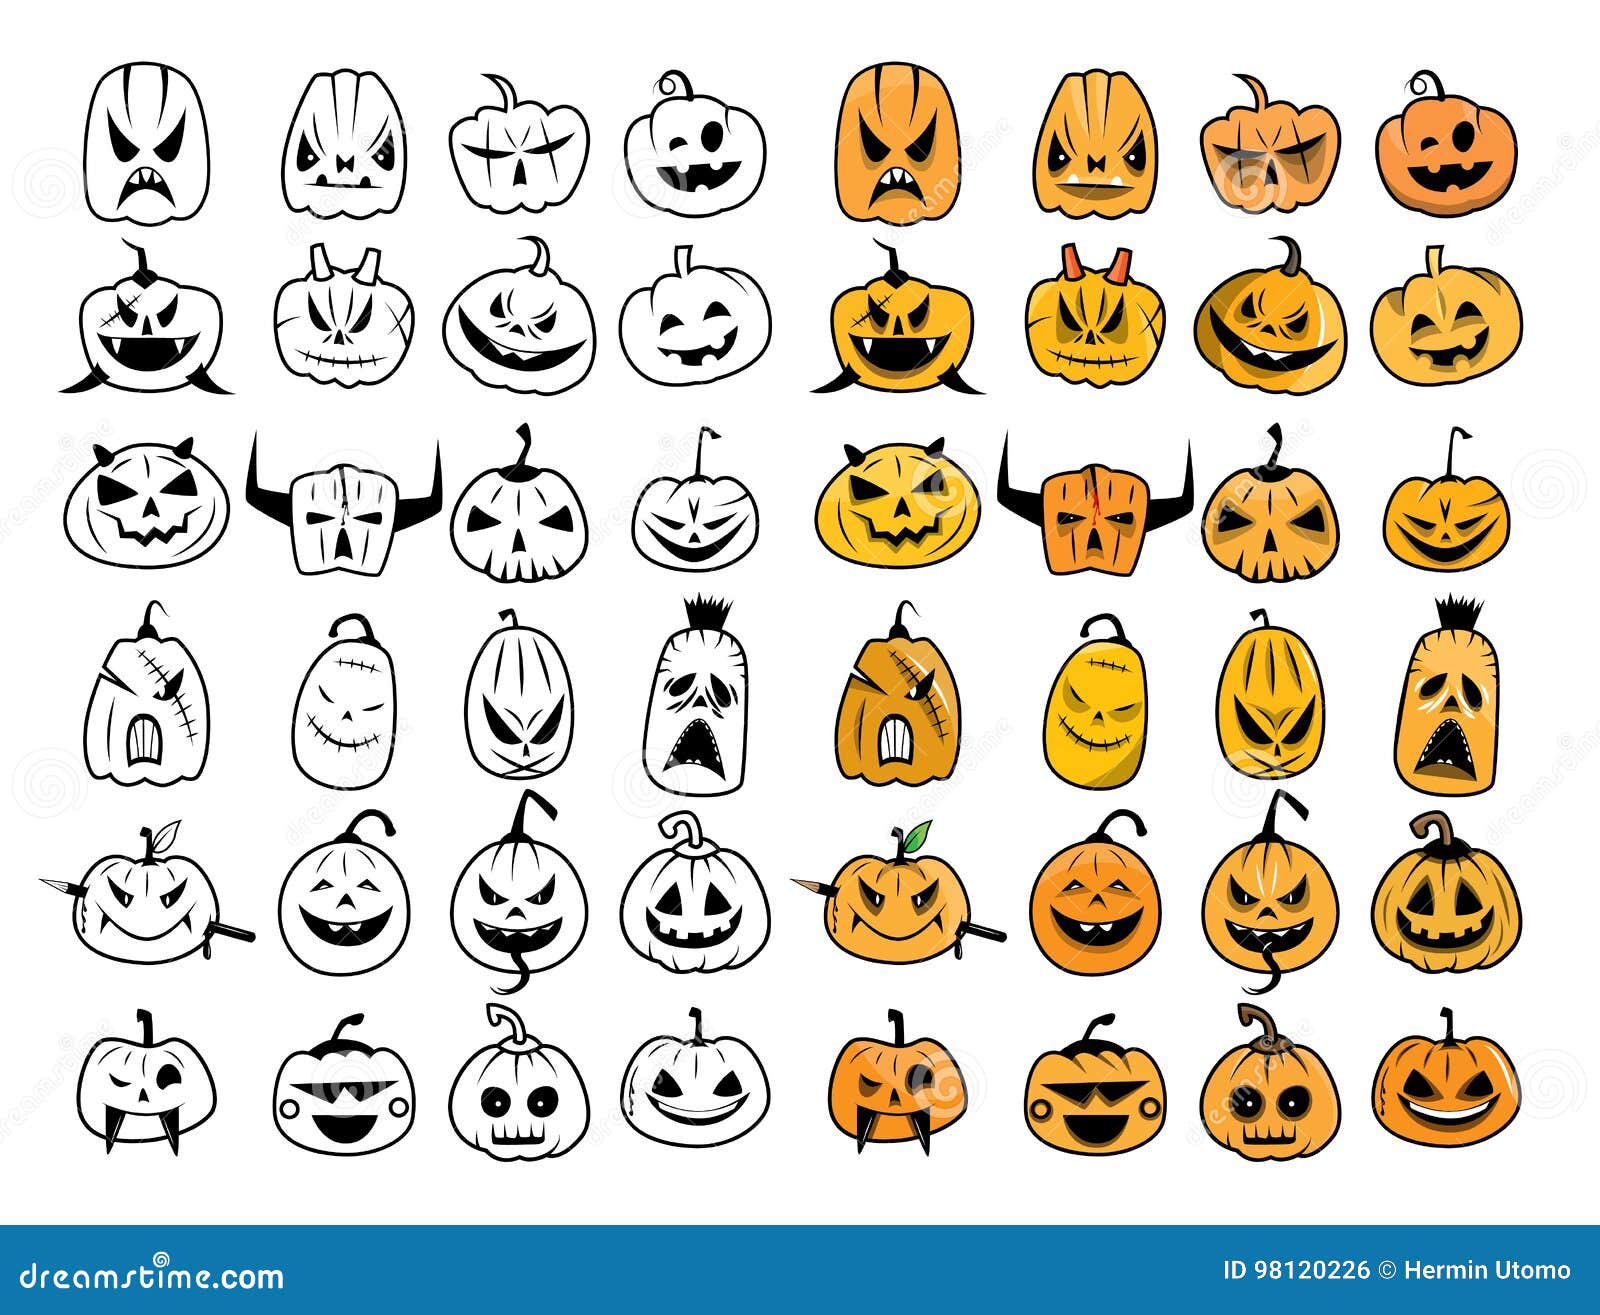 Faces of Horror stock vector. Illustration of icon, faces - 98120226